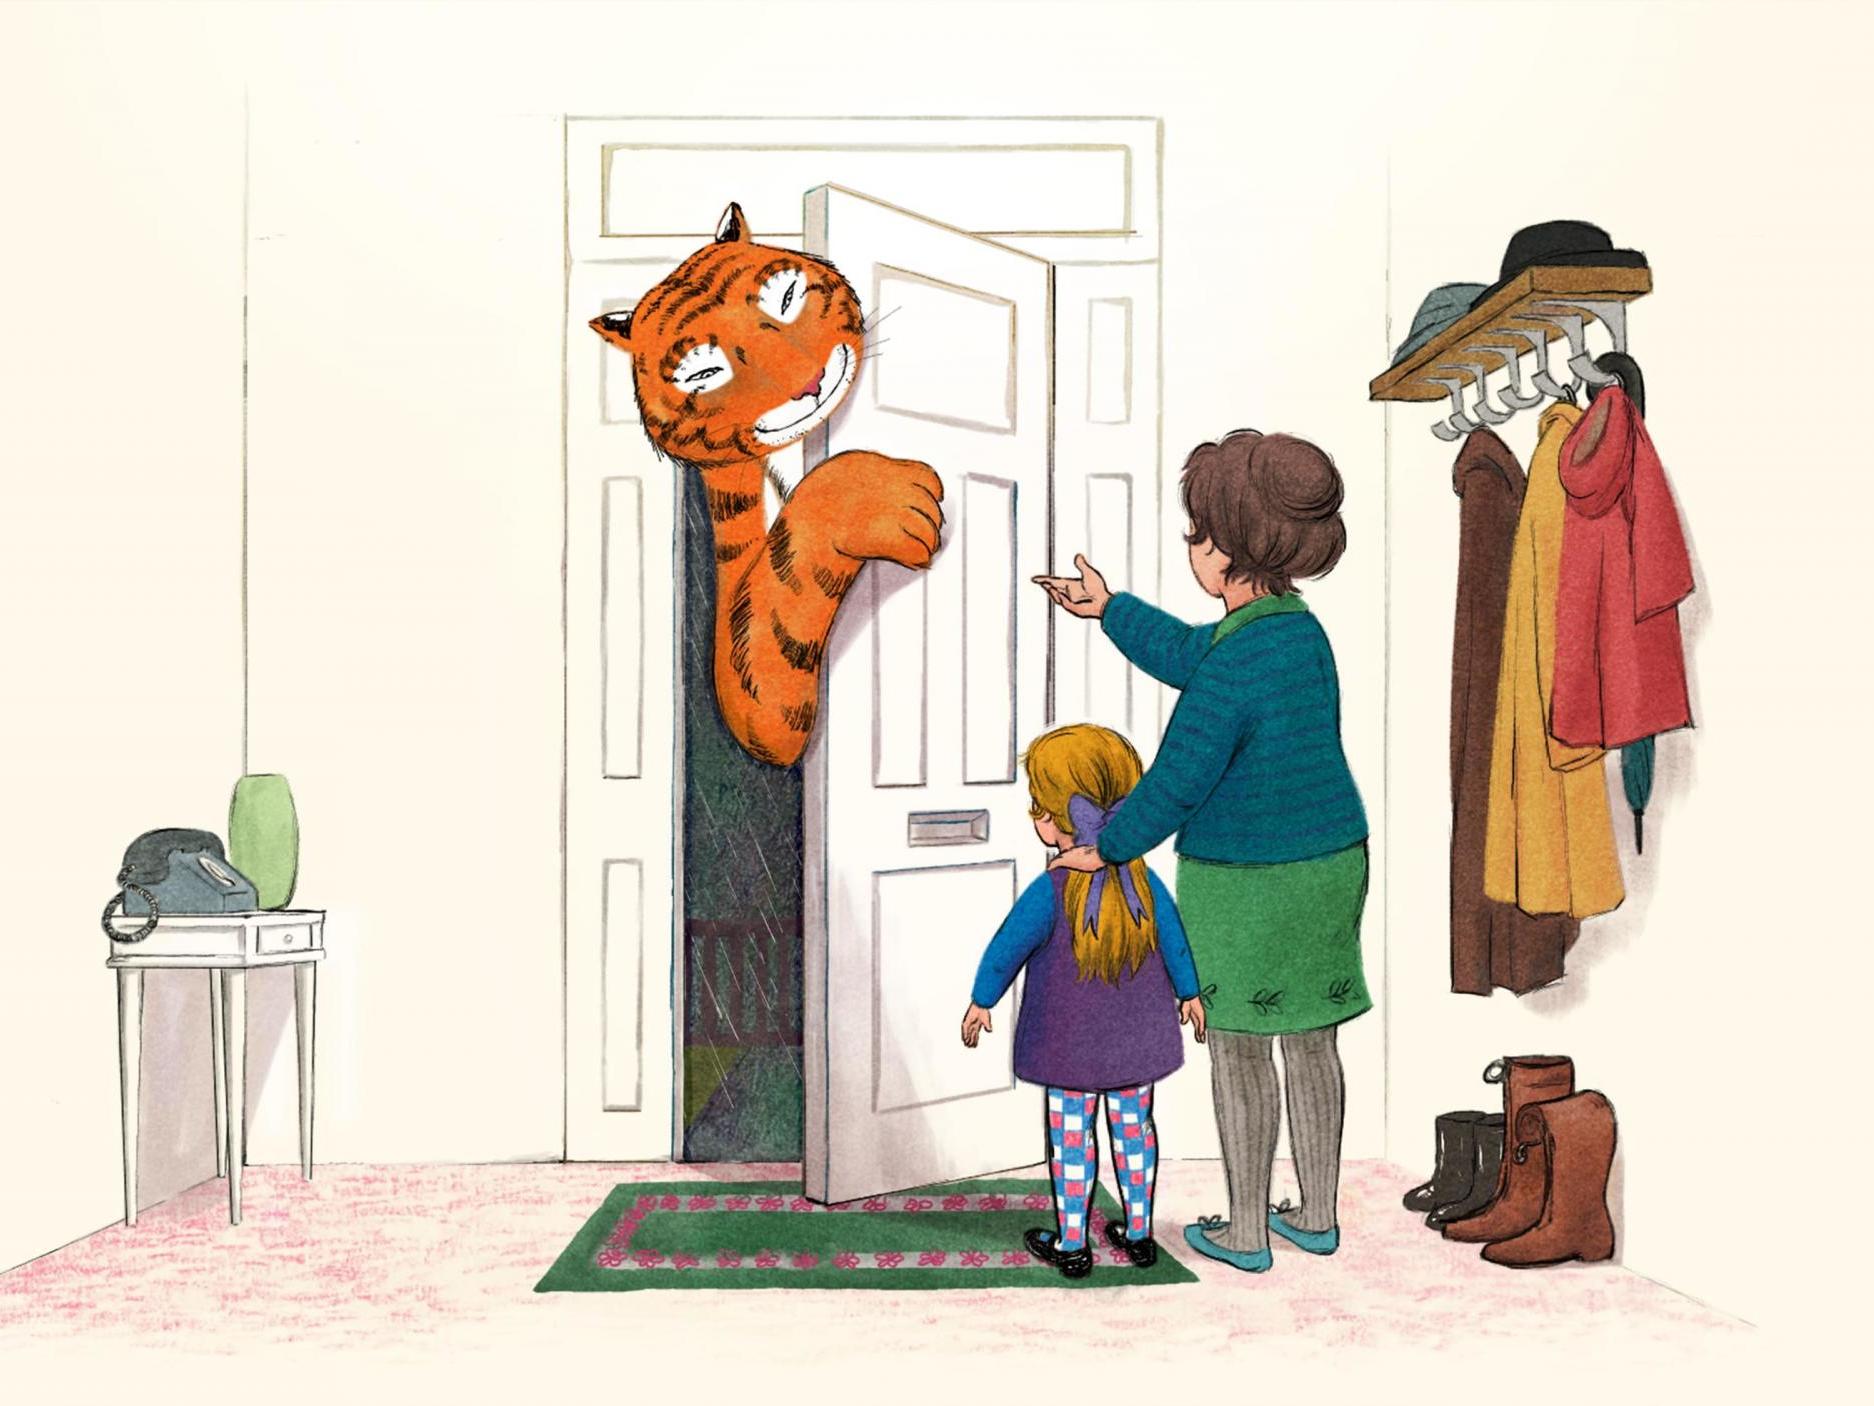 https://static.independent.co.uk/s3fs-public/thumbnails/image/2019/12/09/11/the-tiger-who-came-to-tea-1.jpg